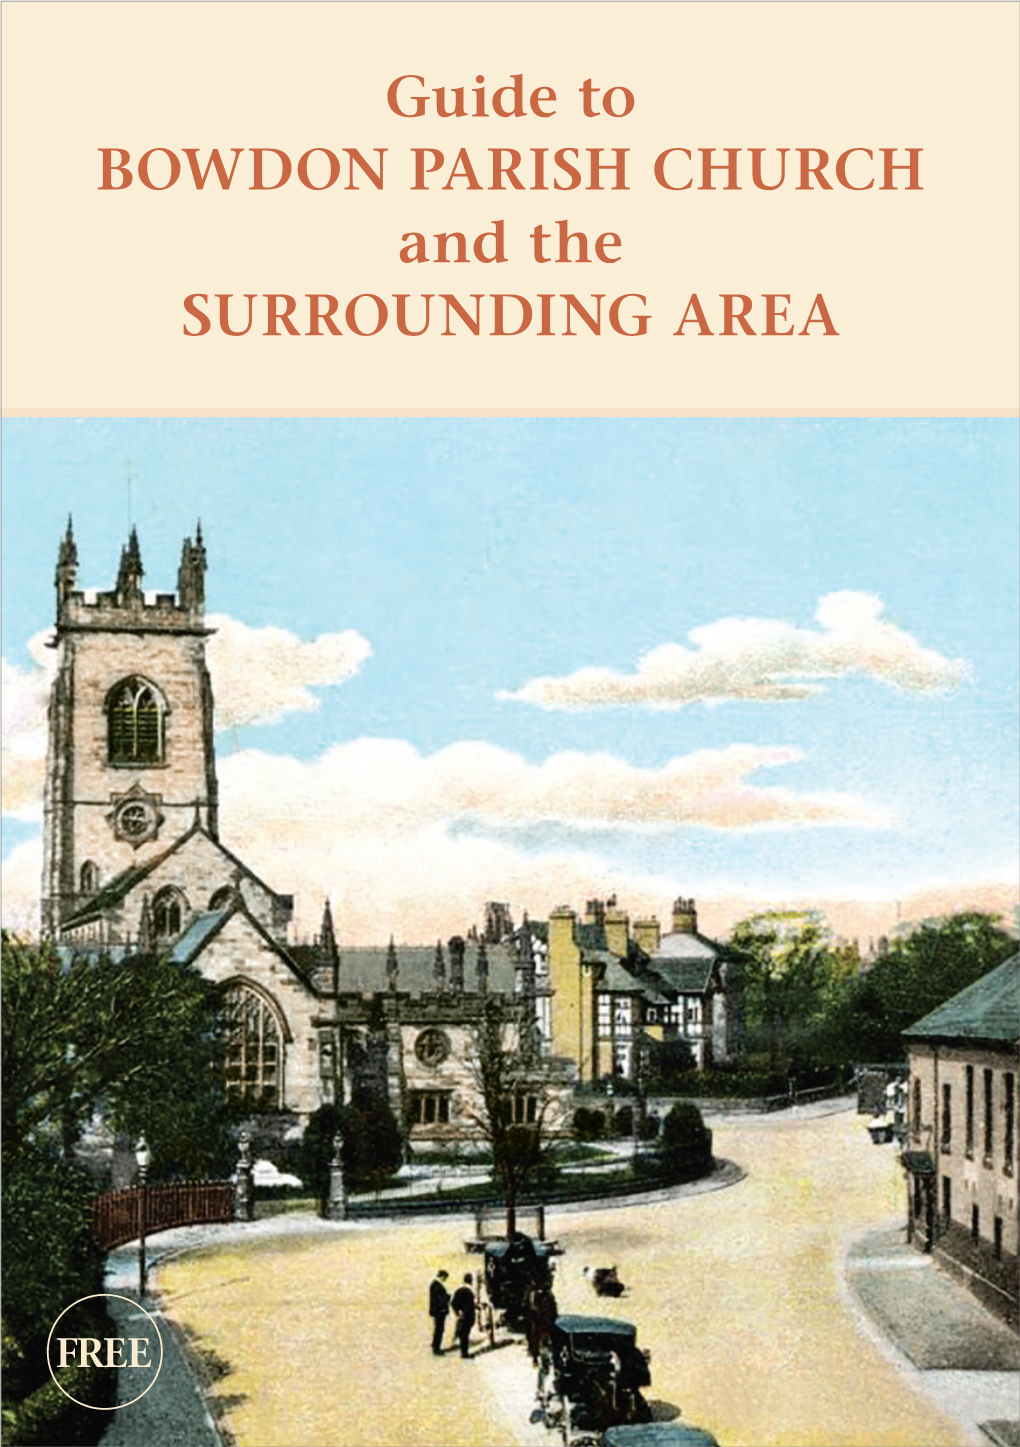 Guide to BOWDON PARISH CHURCH and the SURROUNDING AREA